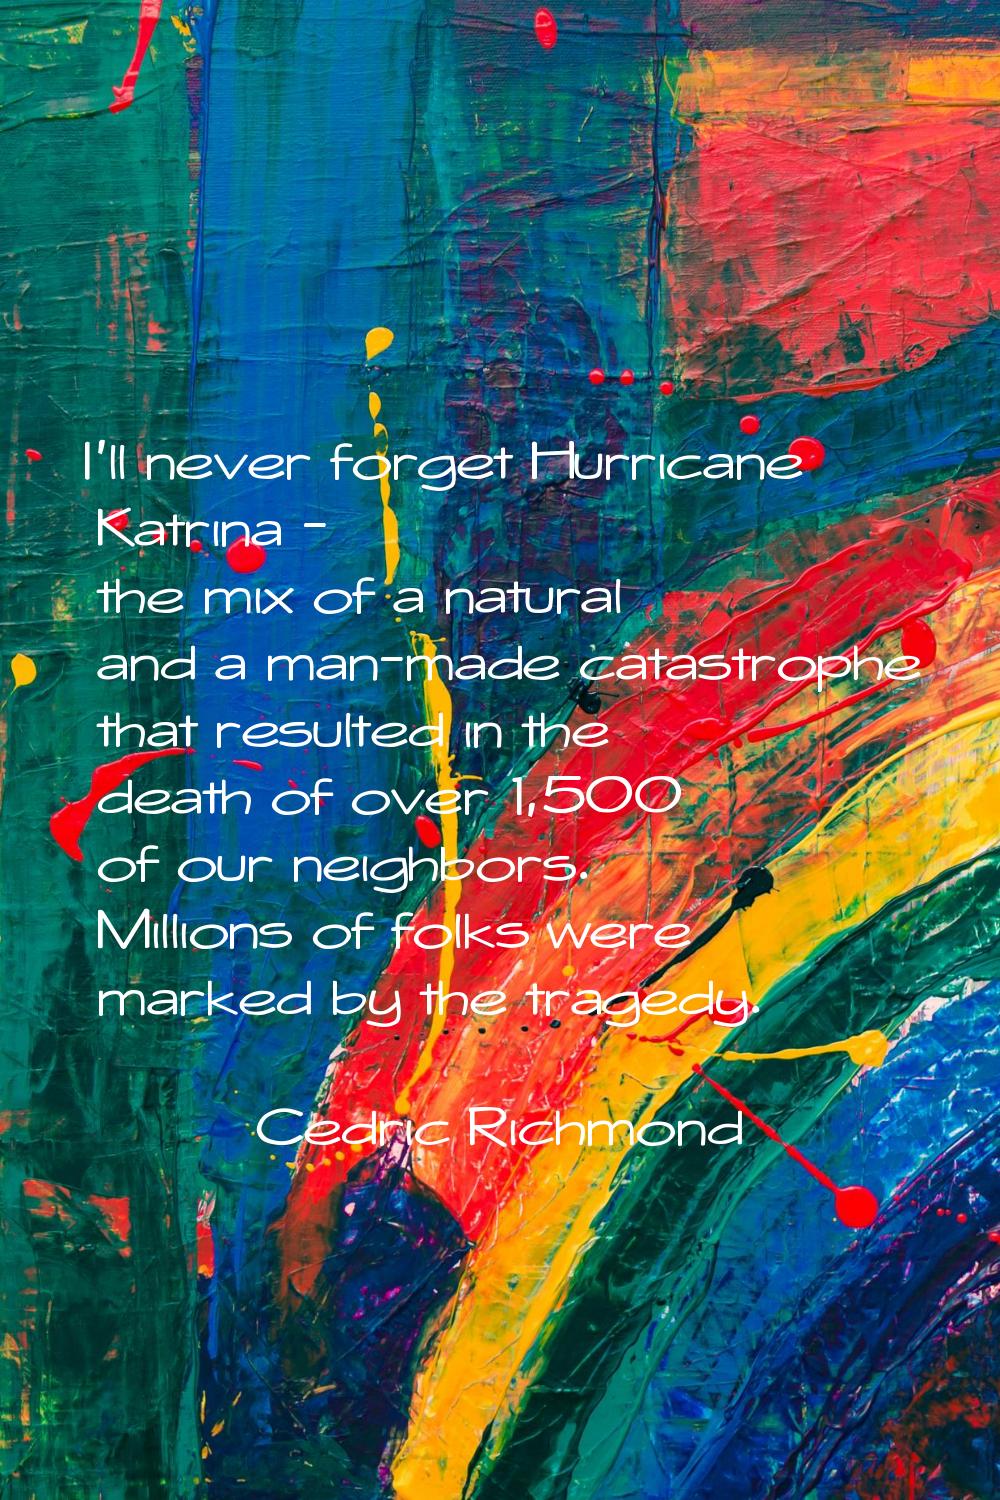 I'll never forget Hurricane Katrina - the mix of a natural and a man-made catastrophe that resulted